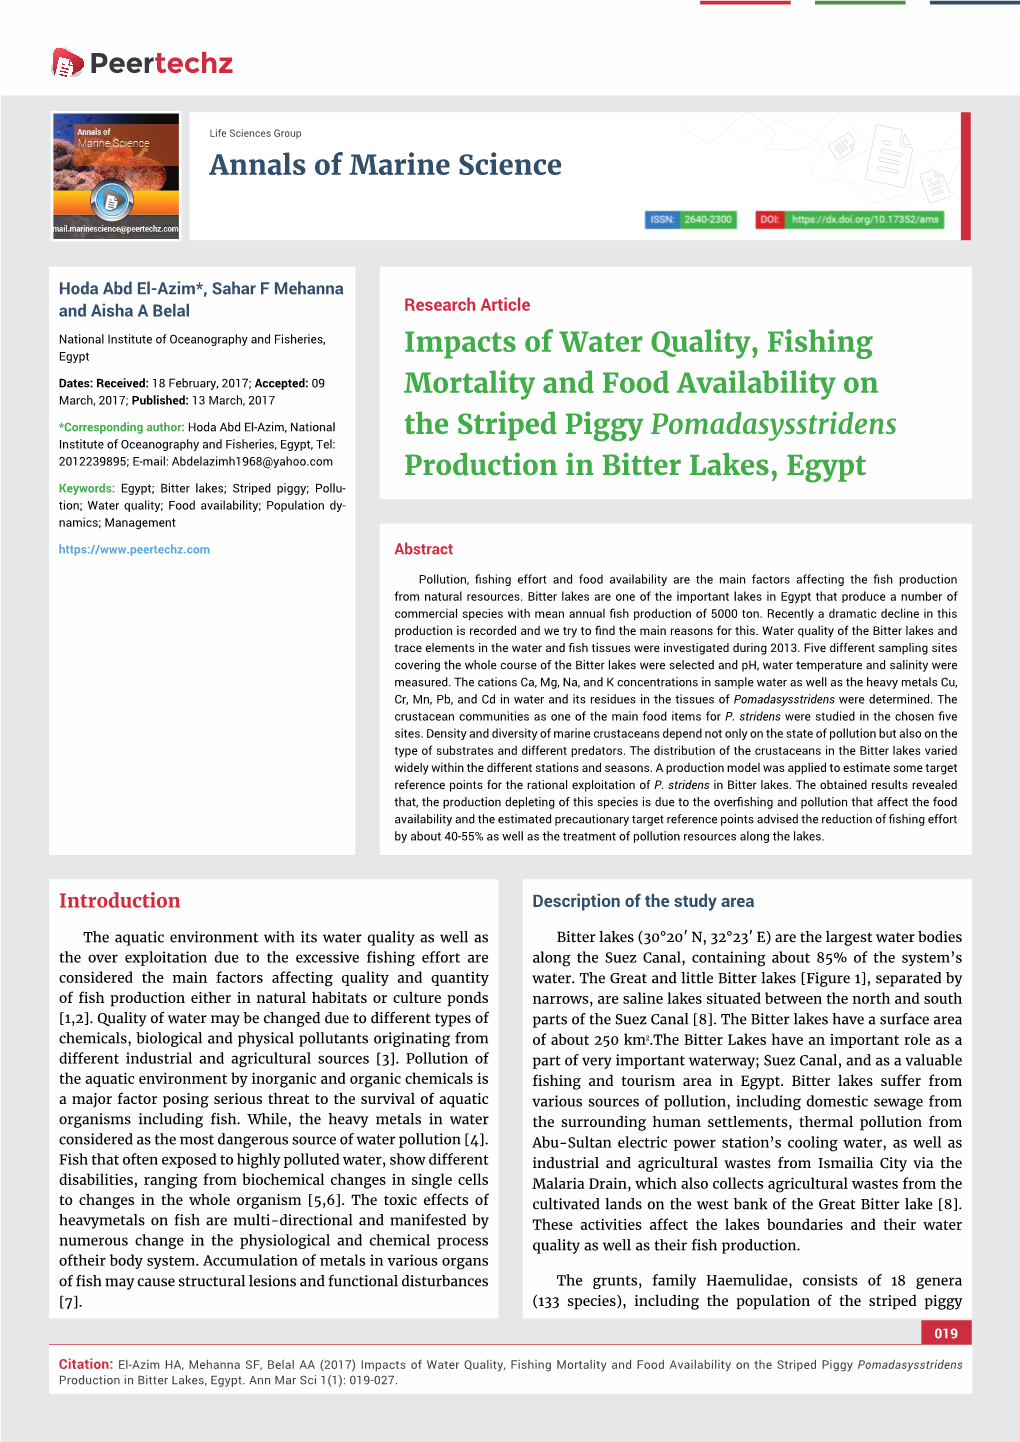 Impacts of Water Quality, Fishing Mortality and Food Availability on the Striped Piggy Pomadasysstridens Production in Bitter Lakes, Egypt